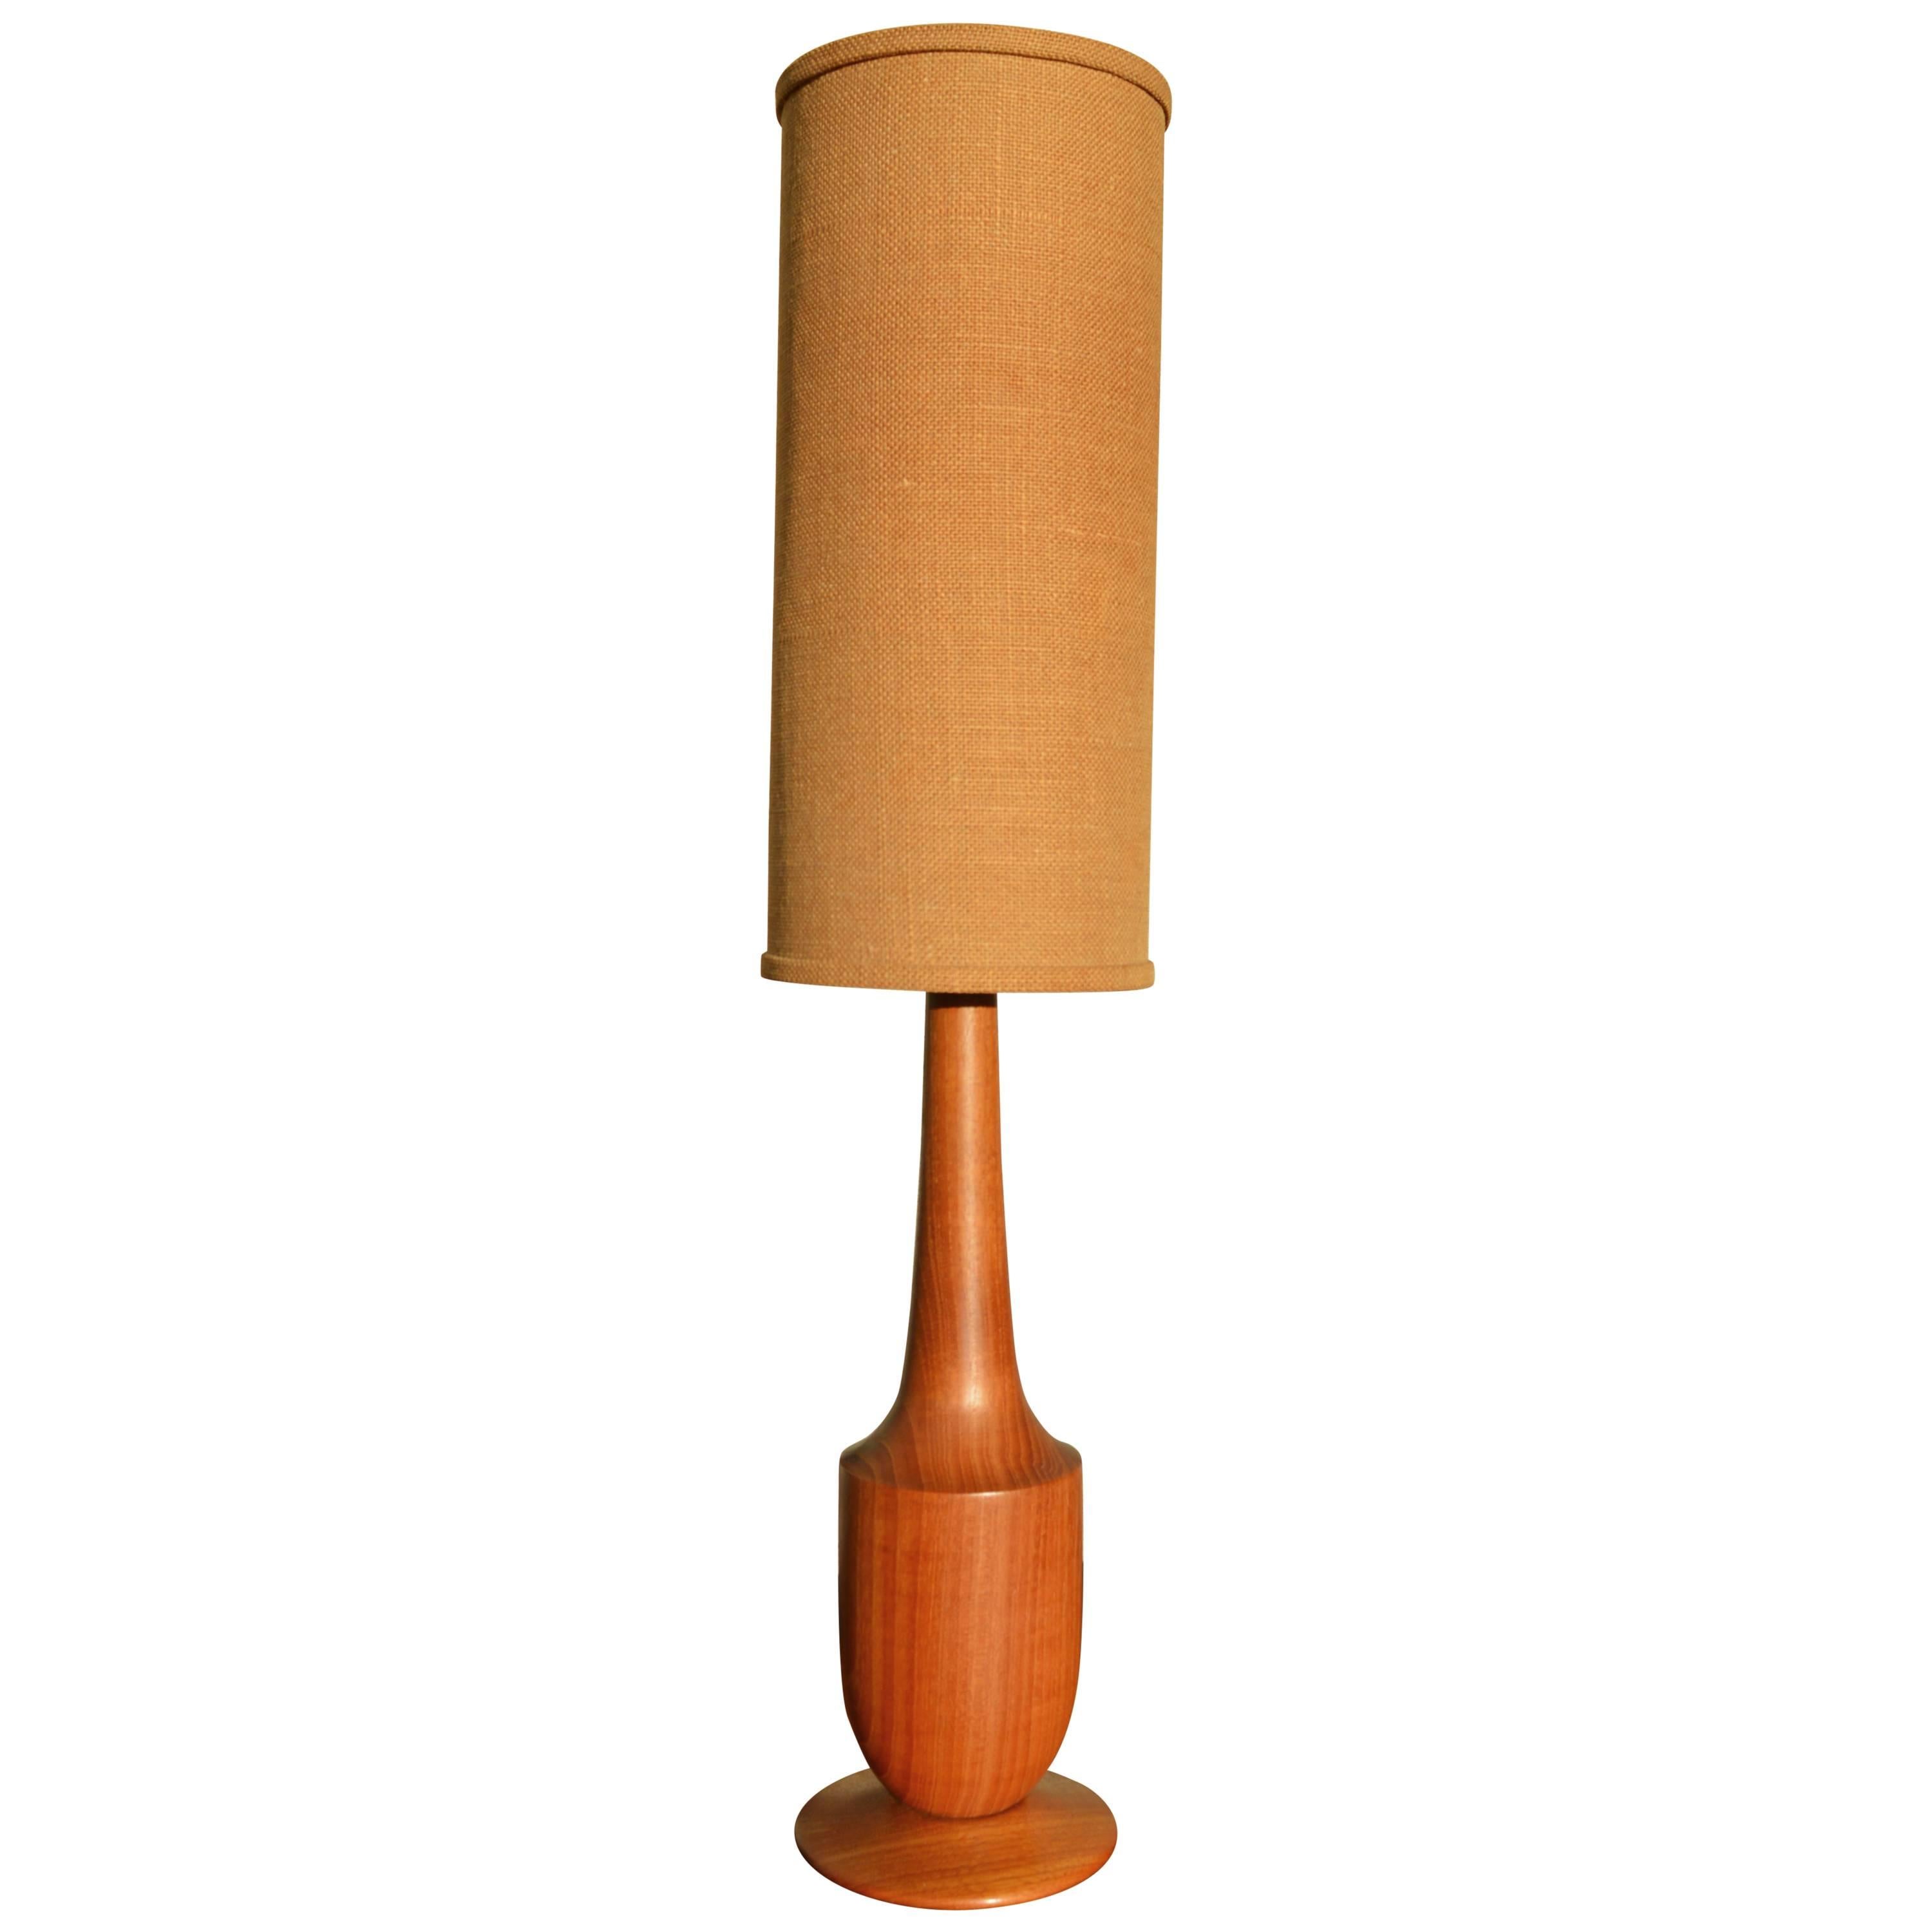 Solid Teak Sculptural Tall Lamp with Jute Cylinder Shade